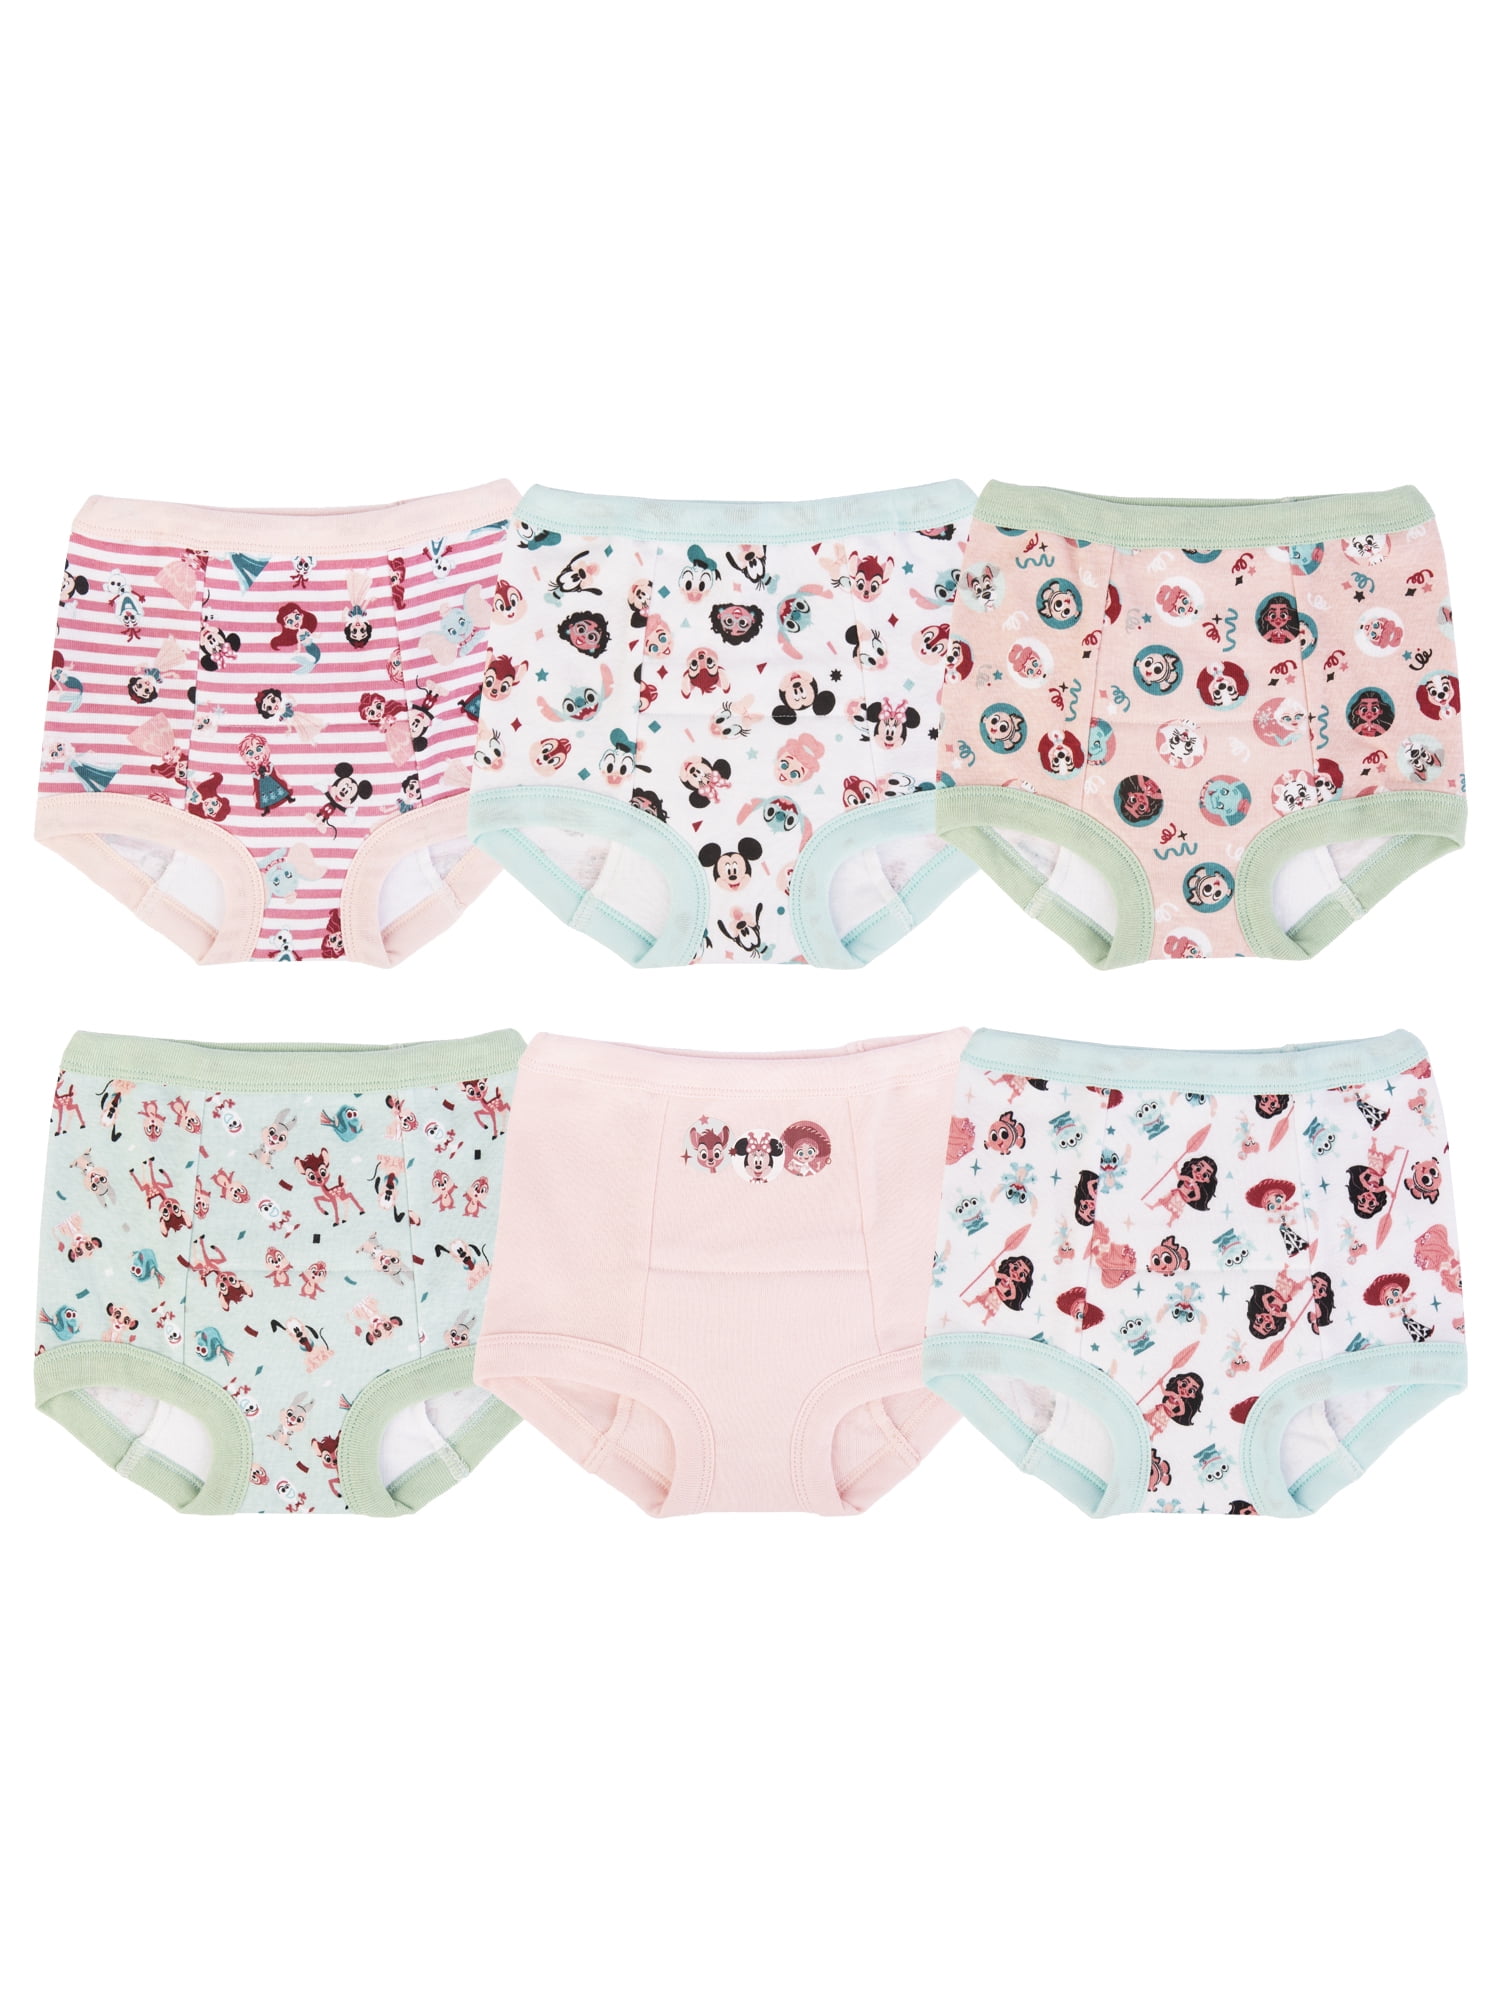 Disney® Junior Youth Girl's 6pk Minnie Mouse® Cotton Briefs - Size